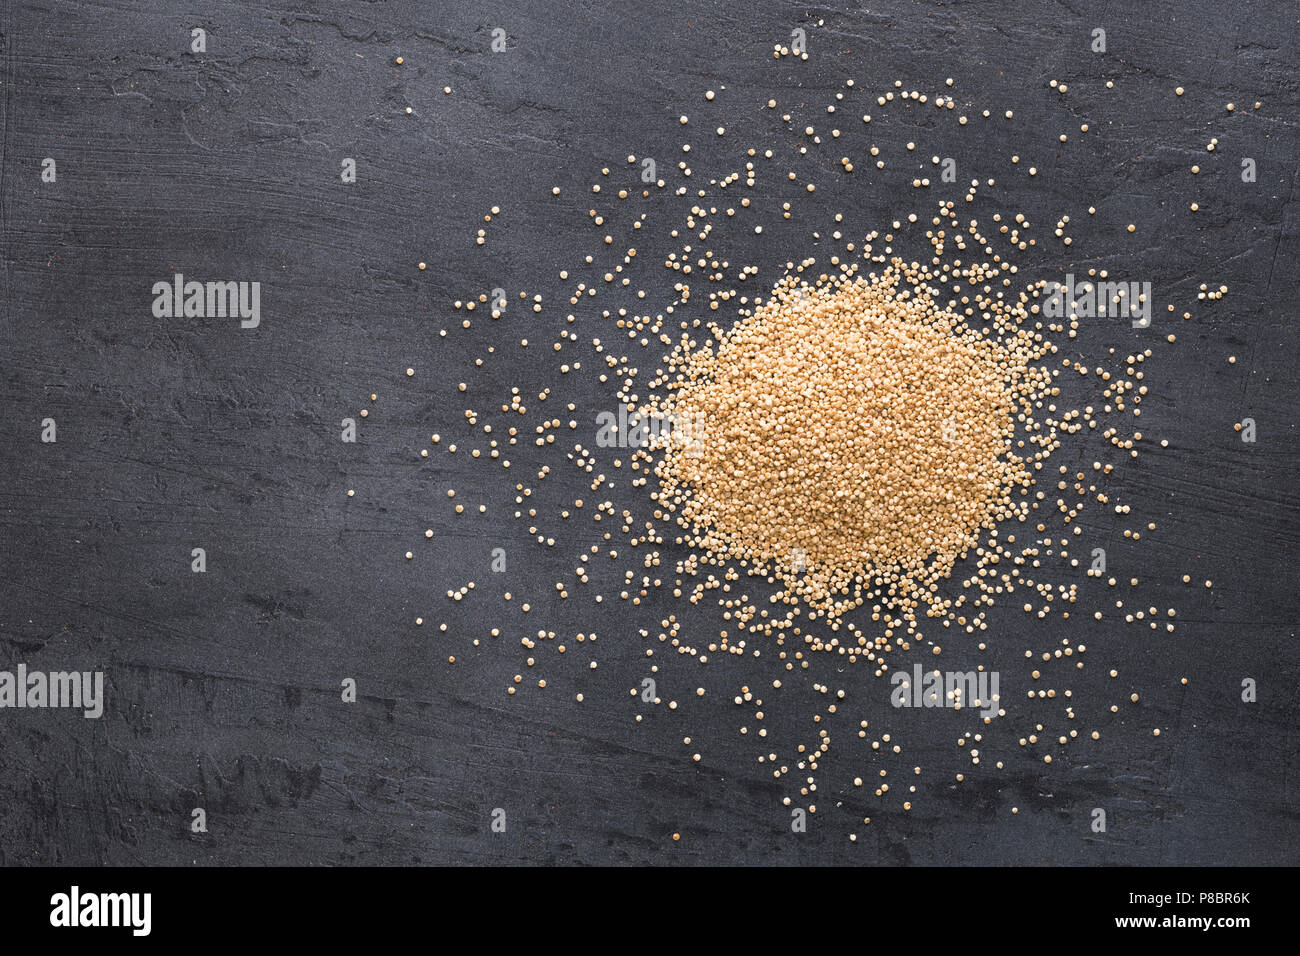 Heap of quinoa on a dark background, top view Stock Photo